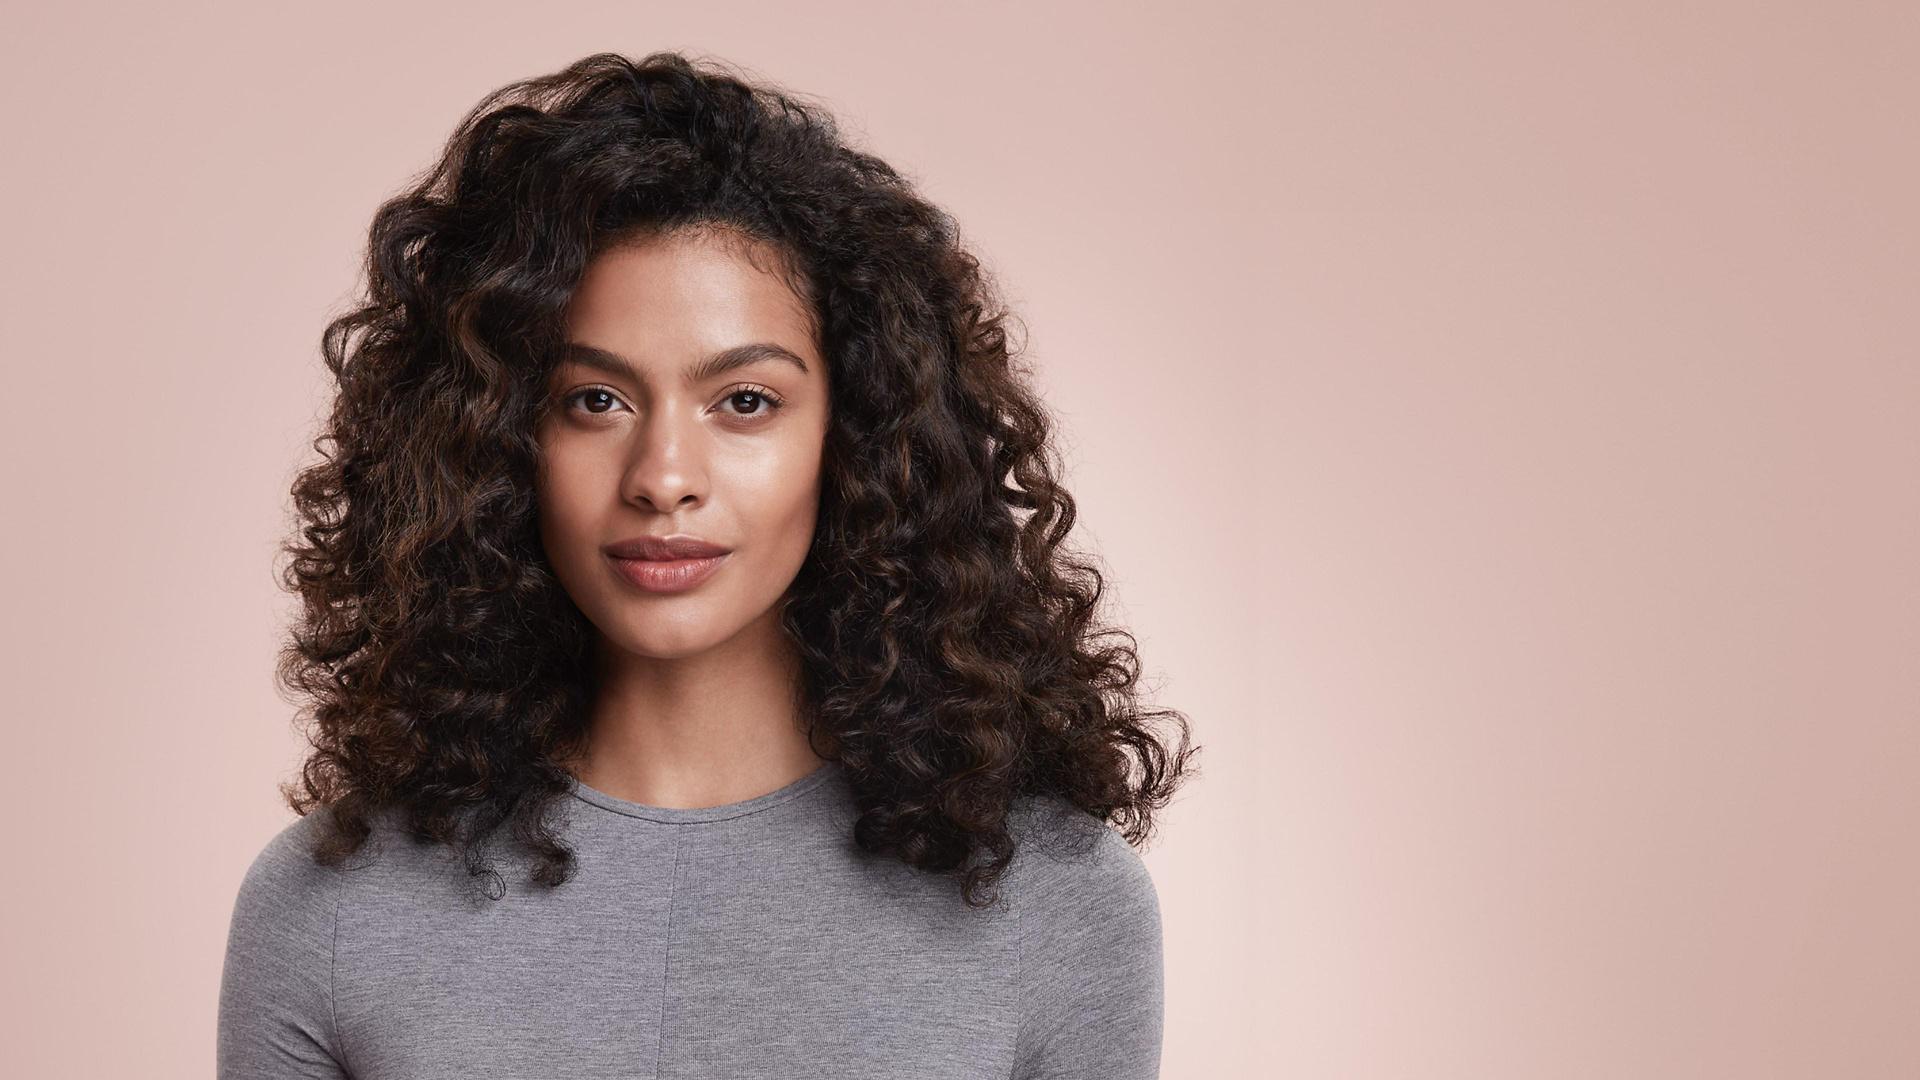 Model with Defined curls